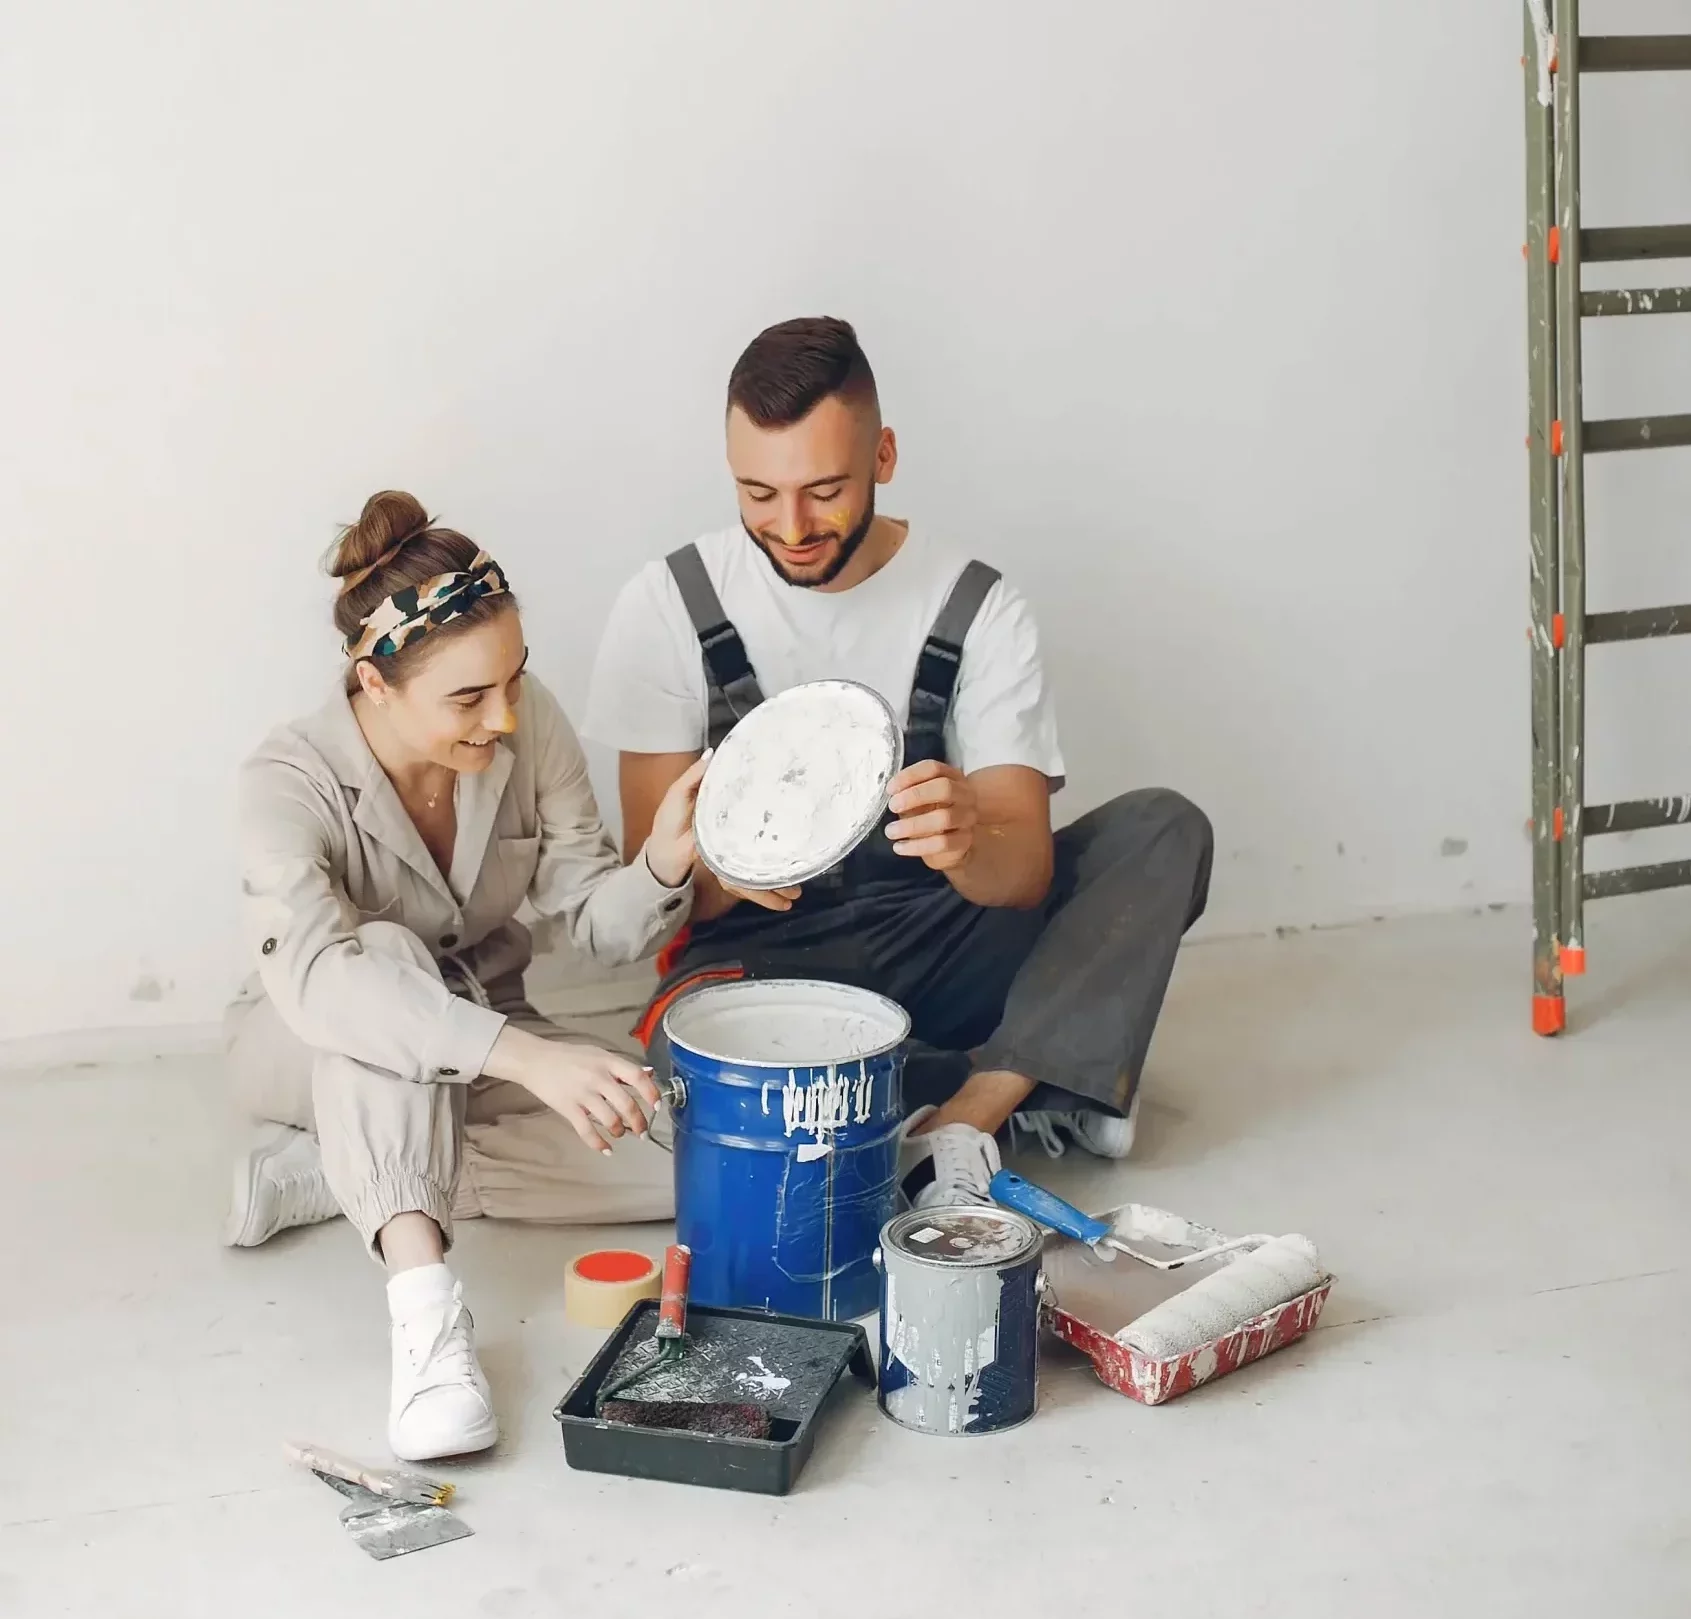 Young smiling couple sitting on the floor surrounded by painting equipment